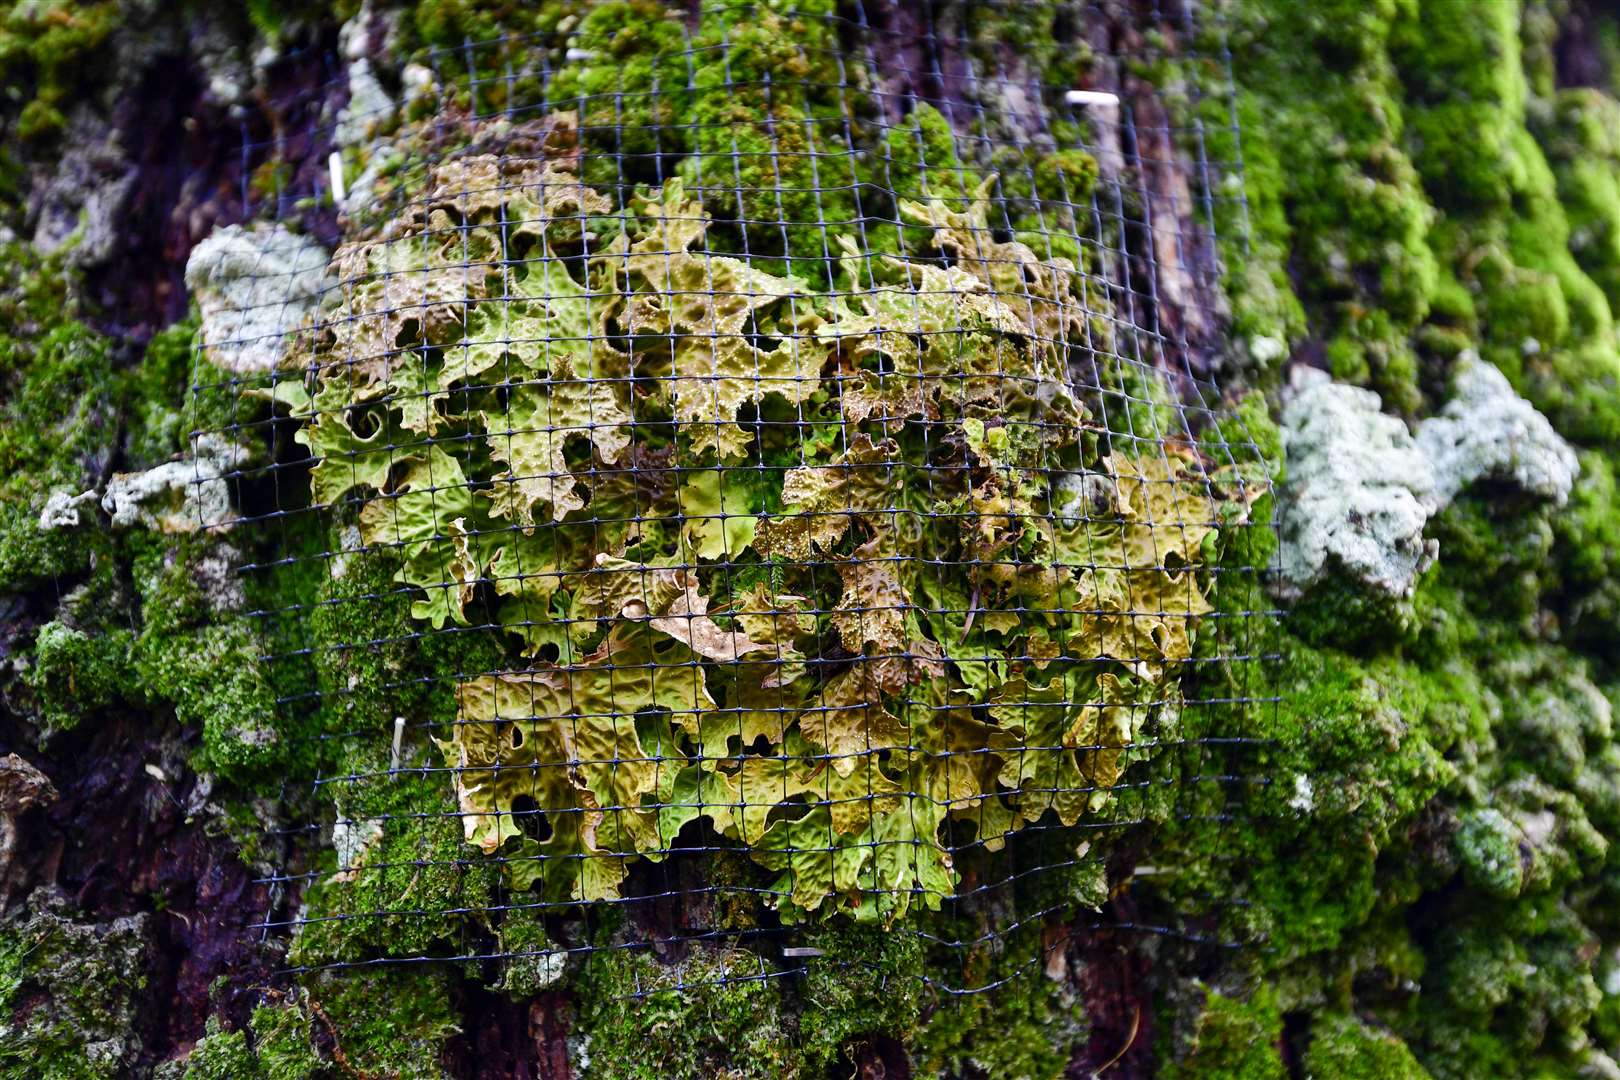 The endangered lichen wired to a new tree (Stuart Walker/National Trust/PA)